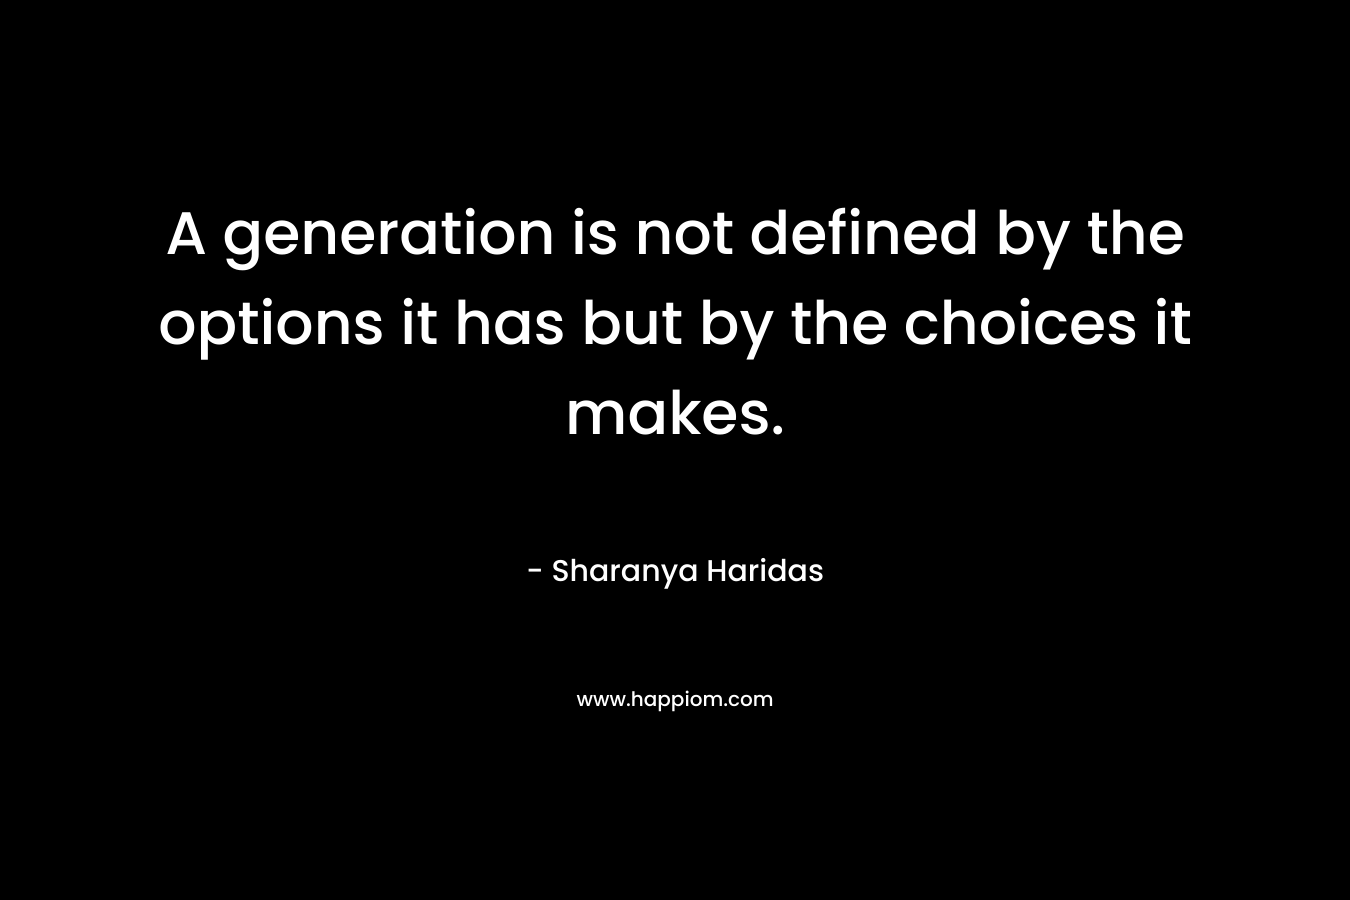 A generation is not defined by the options it has but by the choices it makes.